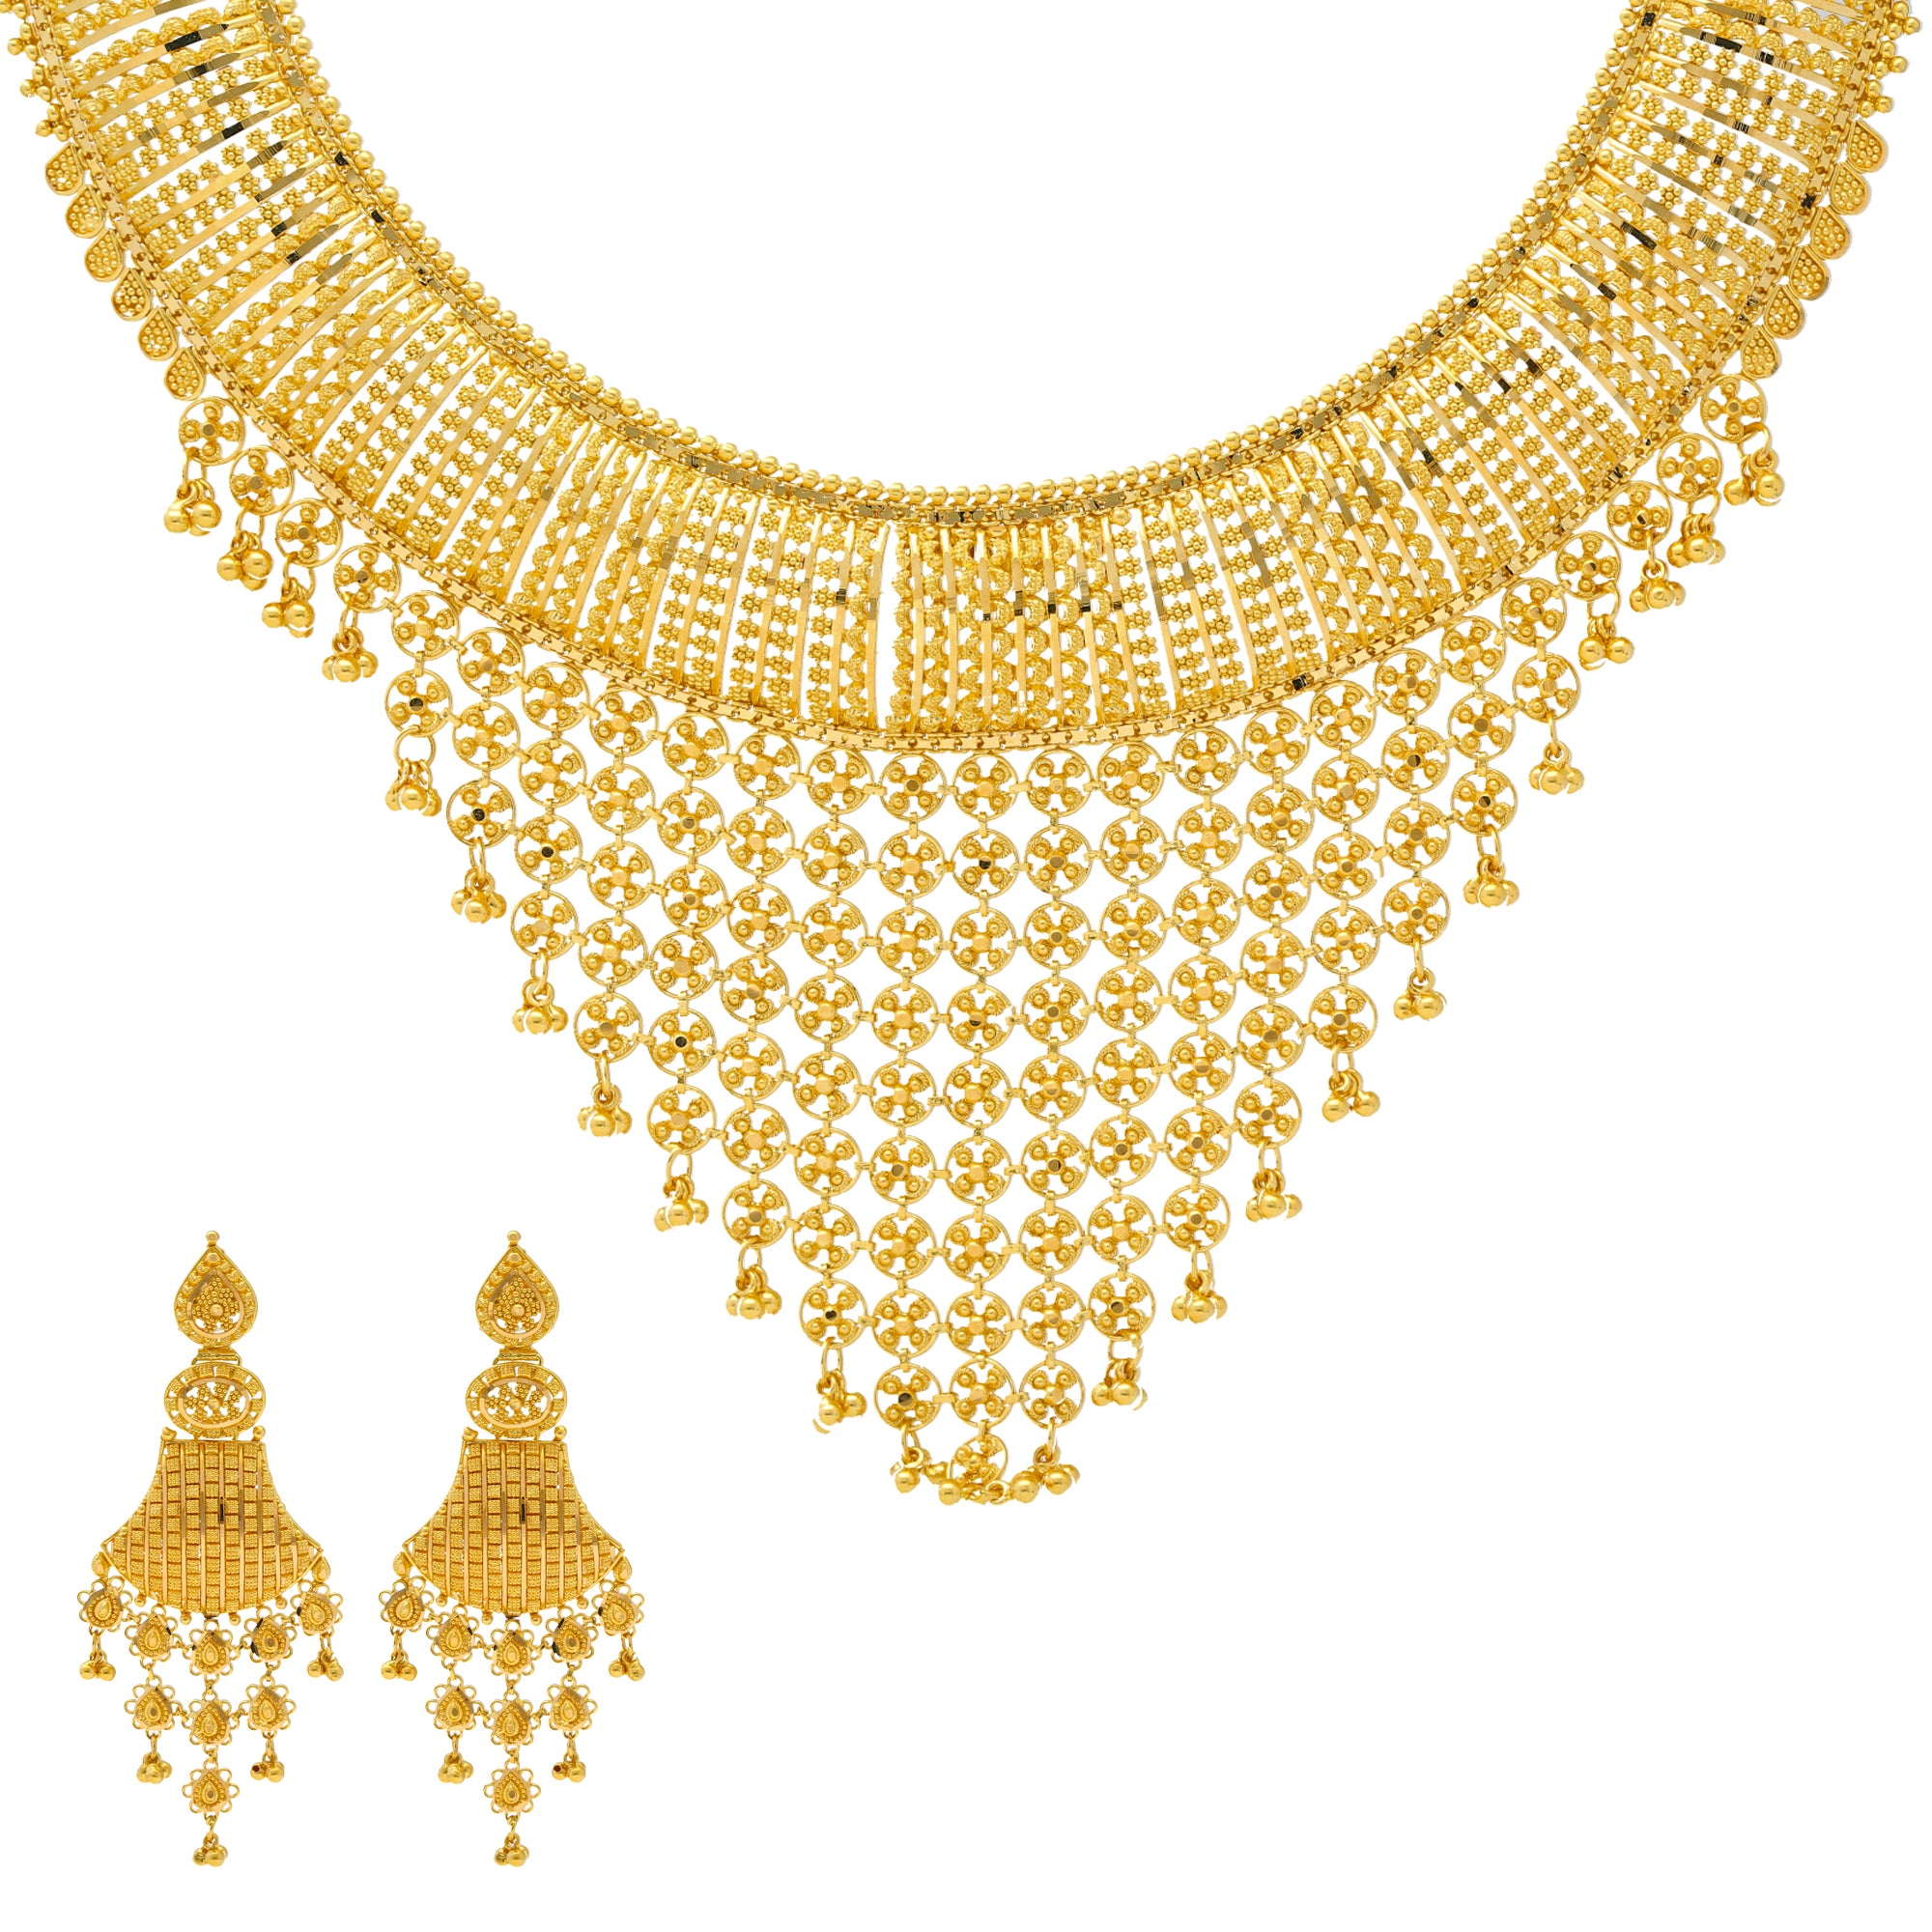 GOLD NECKLACE SET WITH WEIGHT AND PRICE | Gold necklace, Gold necklace set, Gold  necklace designs